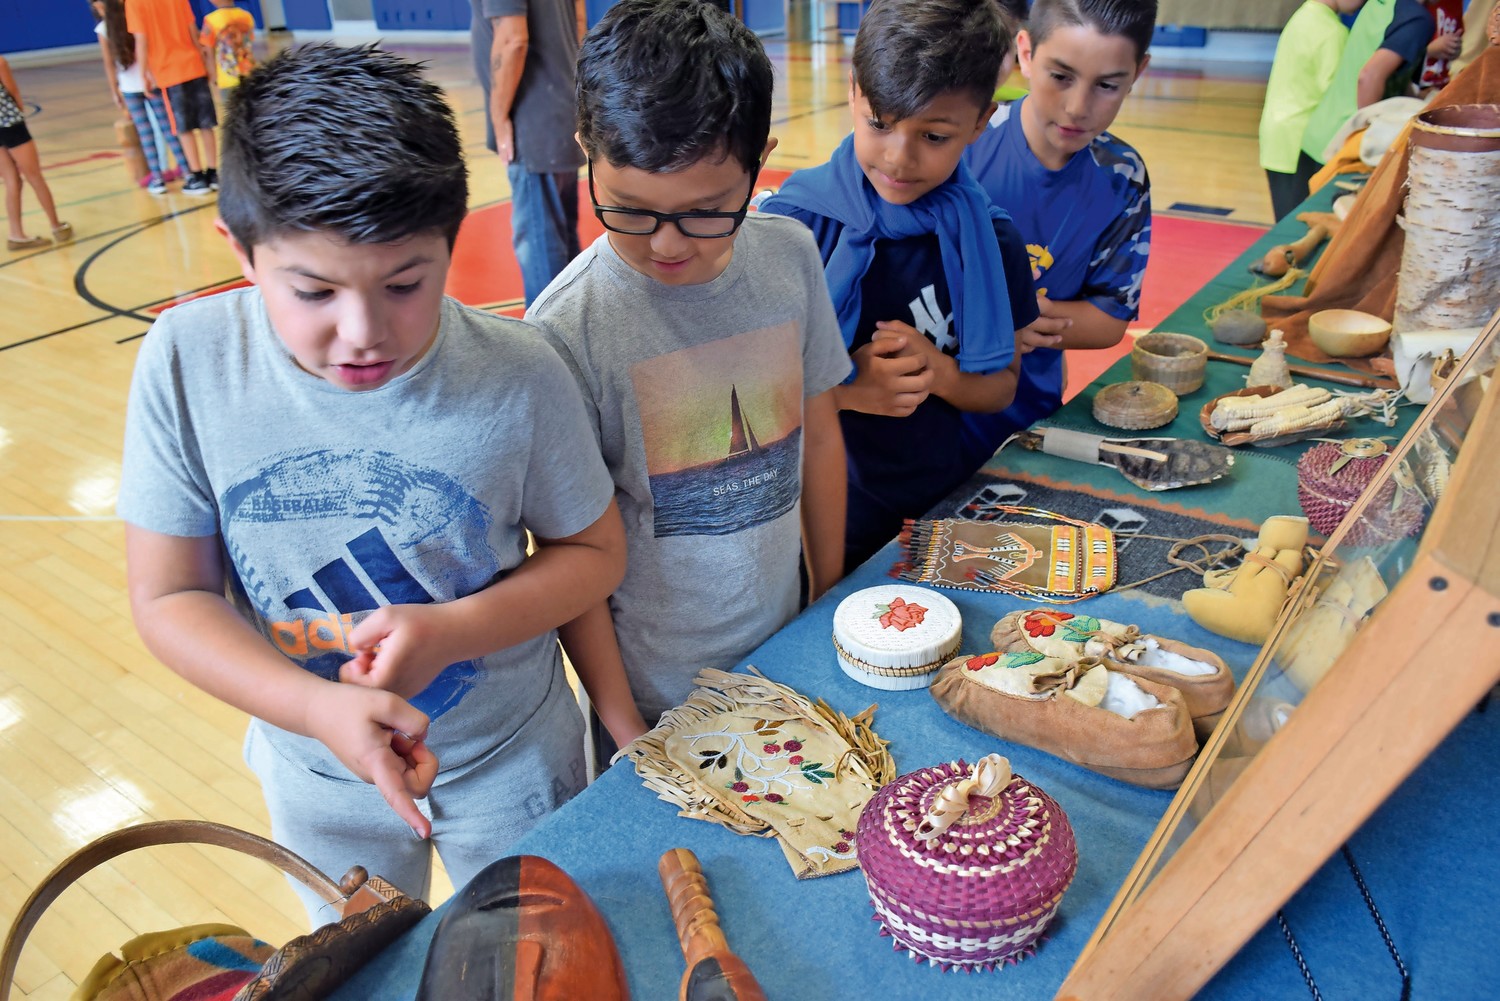 Parkway Elementary School fourth-graders examined American Indian tools during an in-school field trip led by Journeys into American Indian Territory.